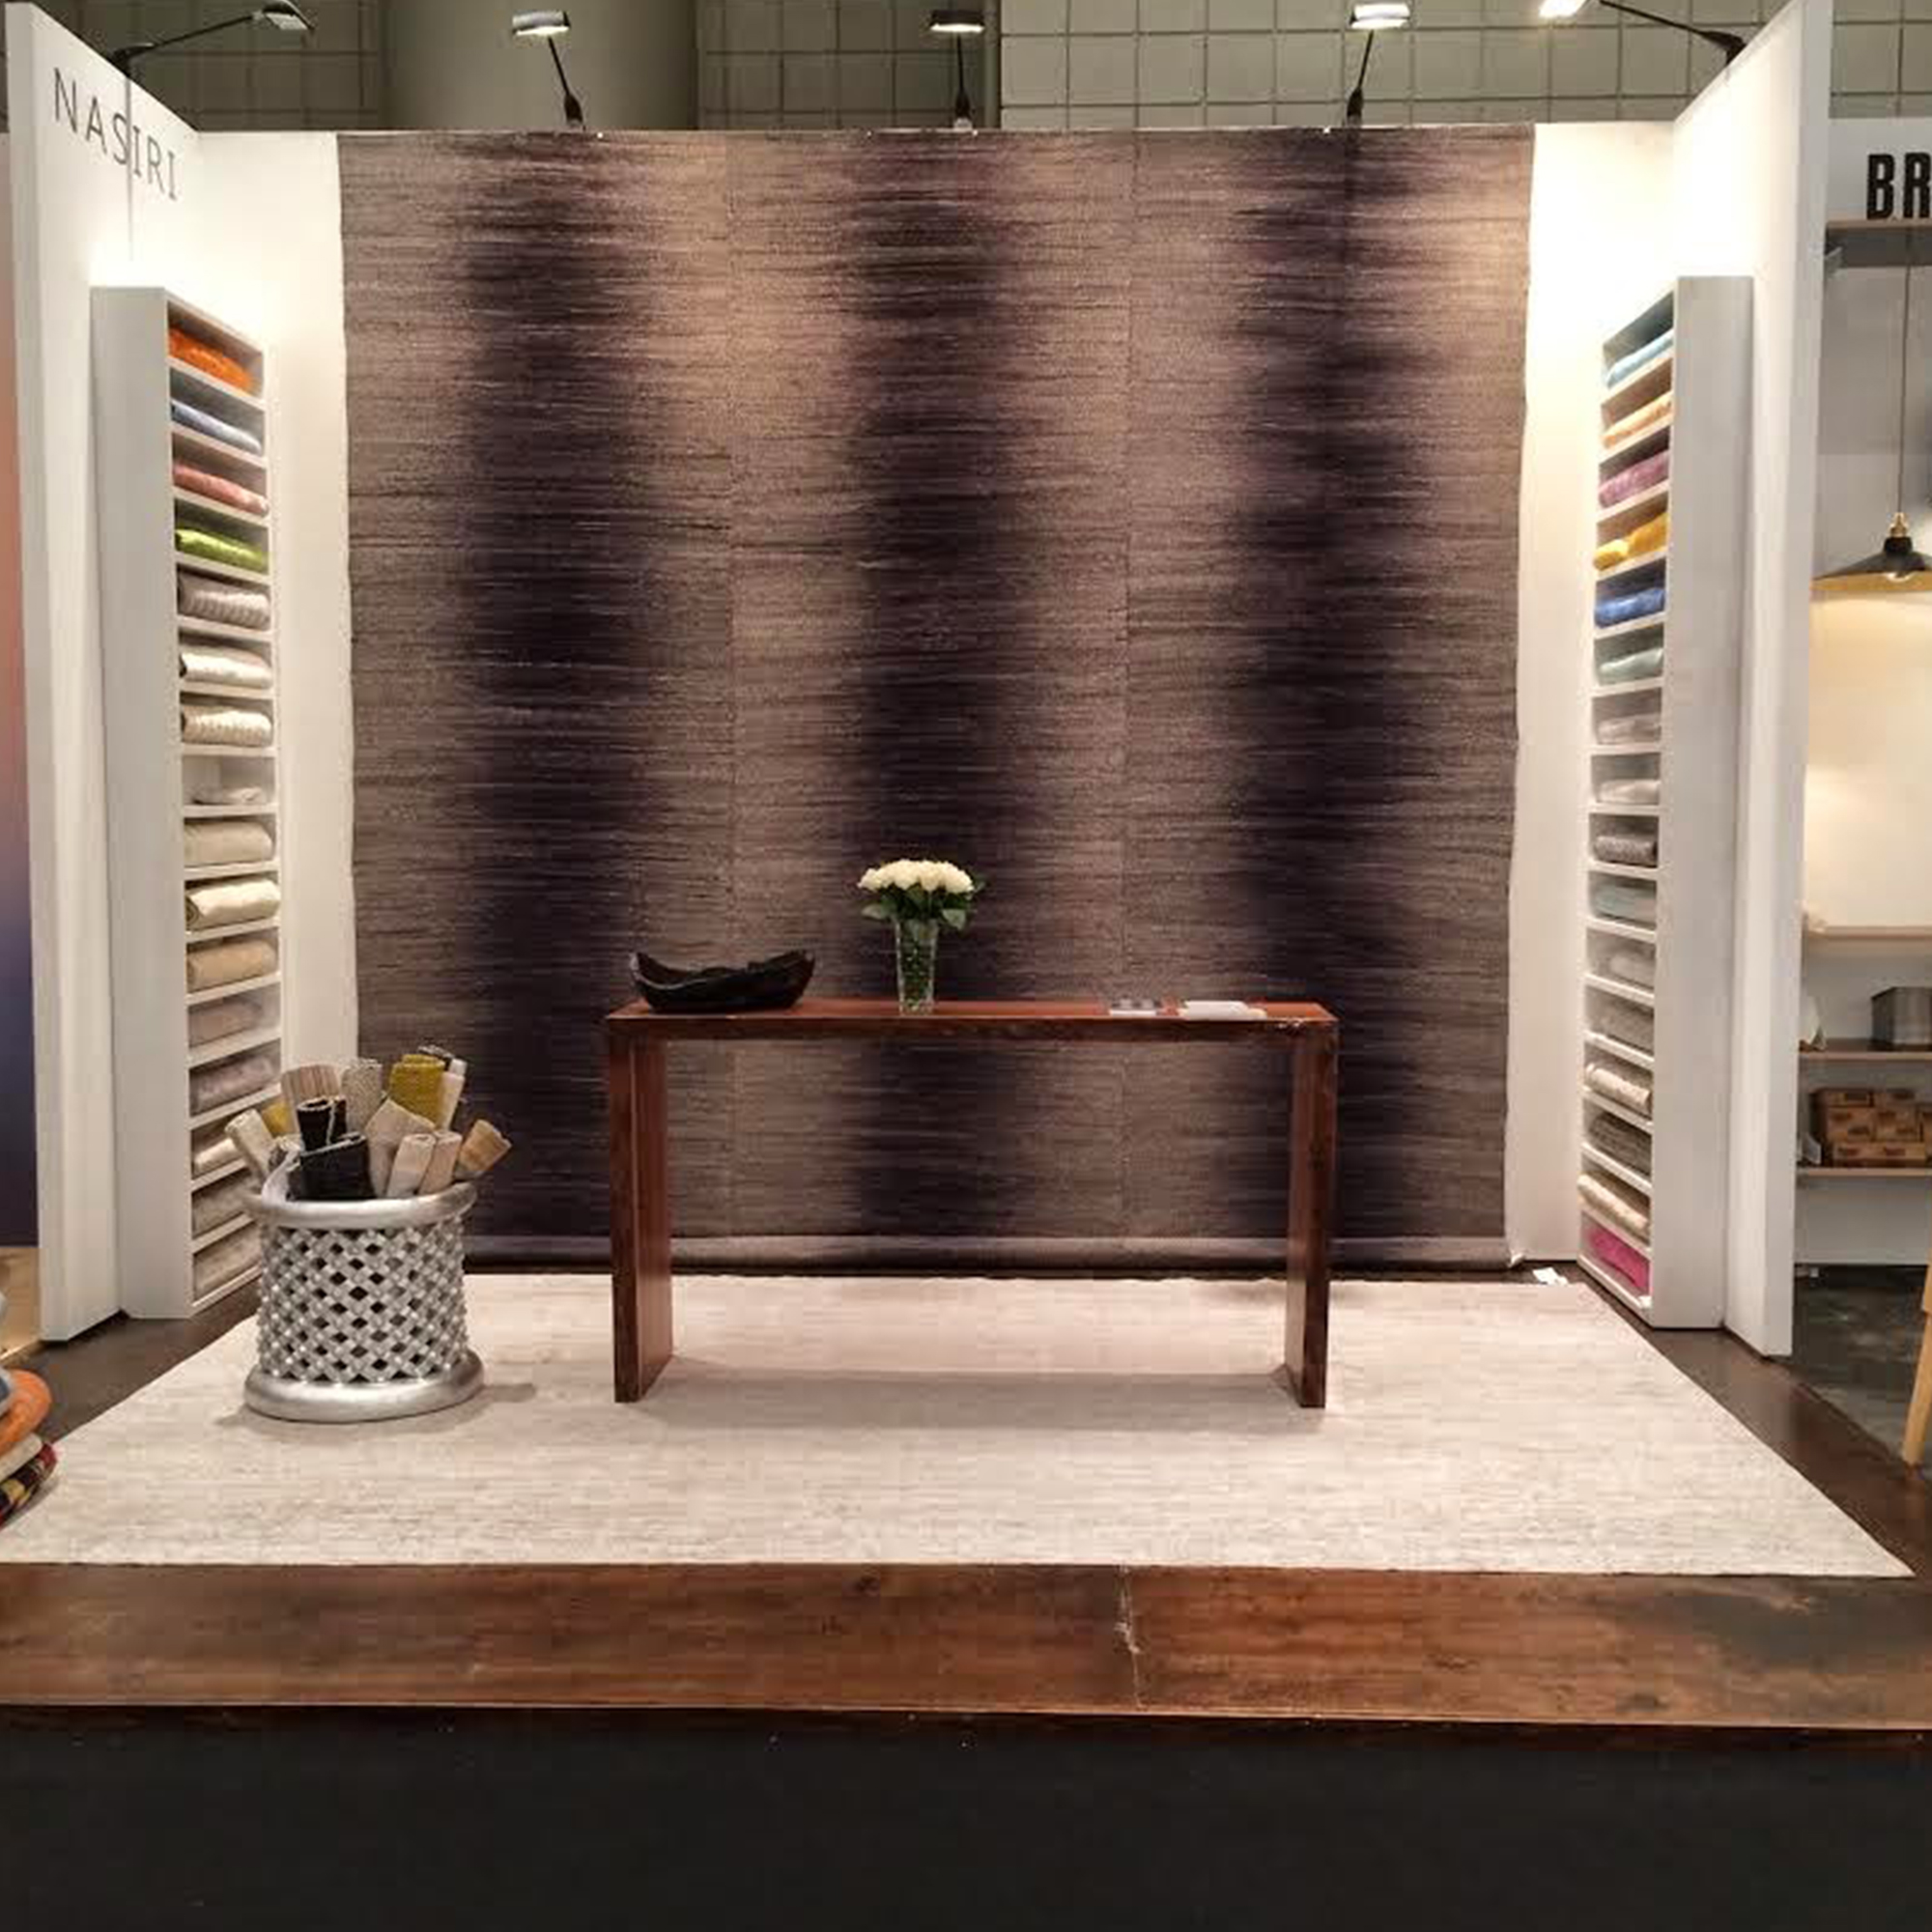 Nasiri Collection Featured in ICFF 2014 Show